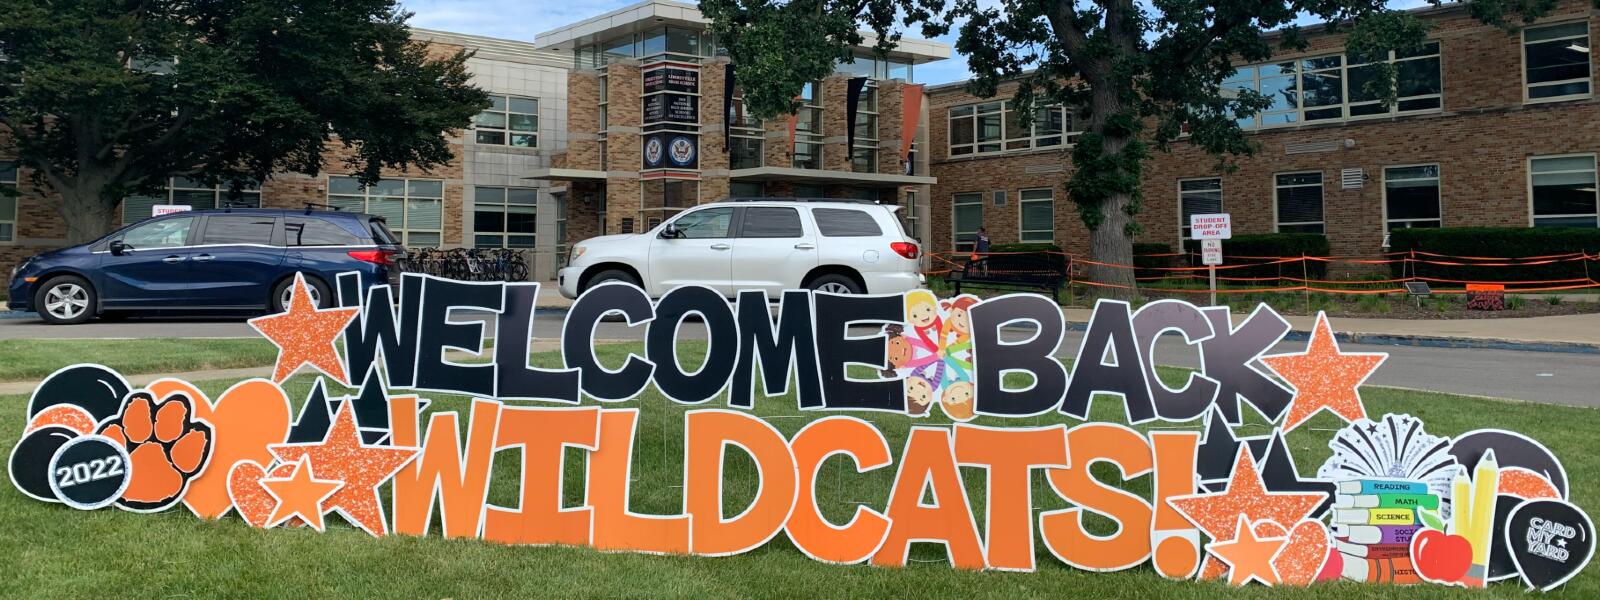 Welcome Back Wildcats sign on the lawn in front of LHS